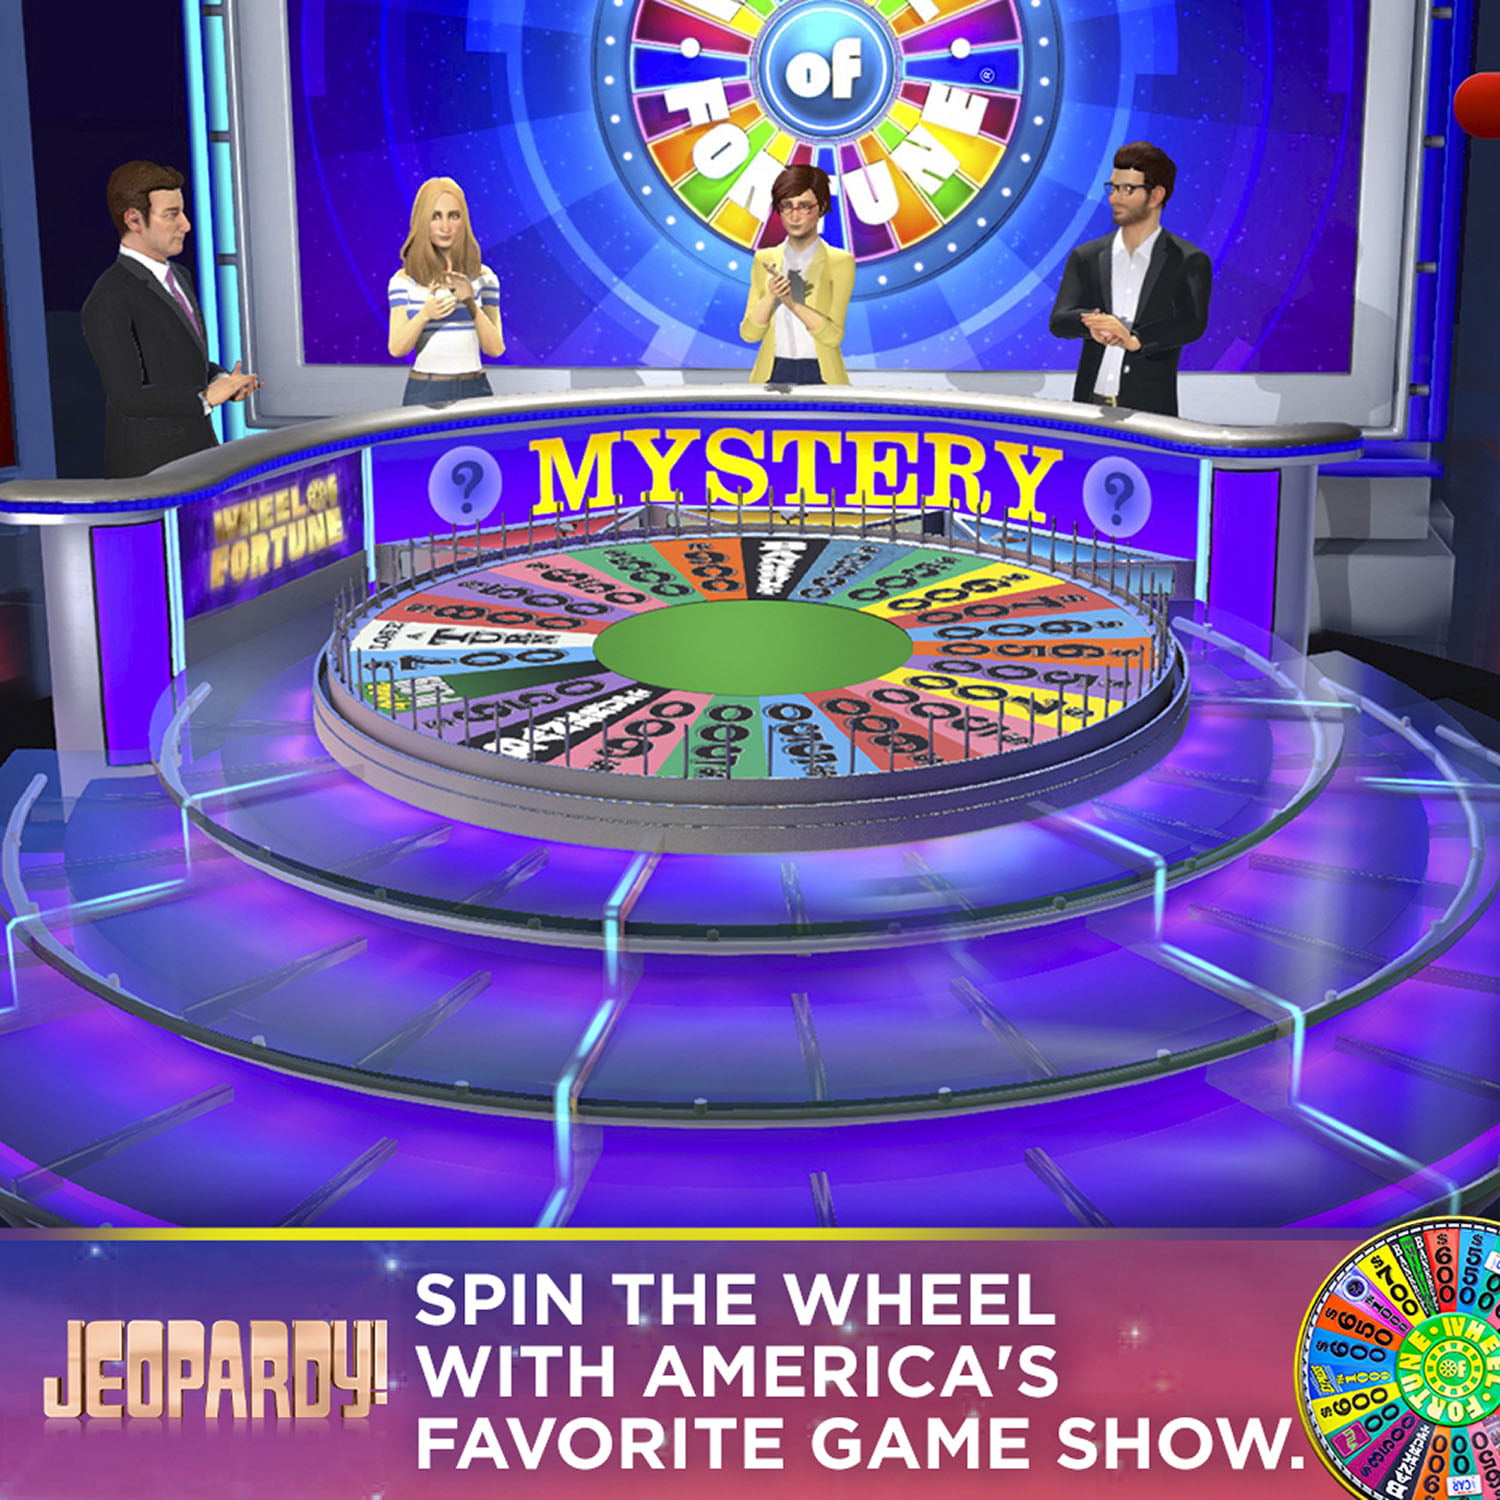 Jeopardy Wheel Of Fortune Compilation Ubisoft Playstation 4